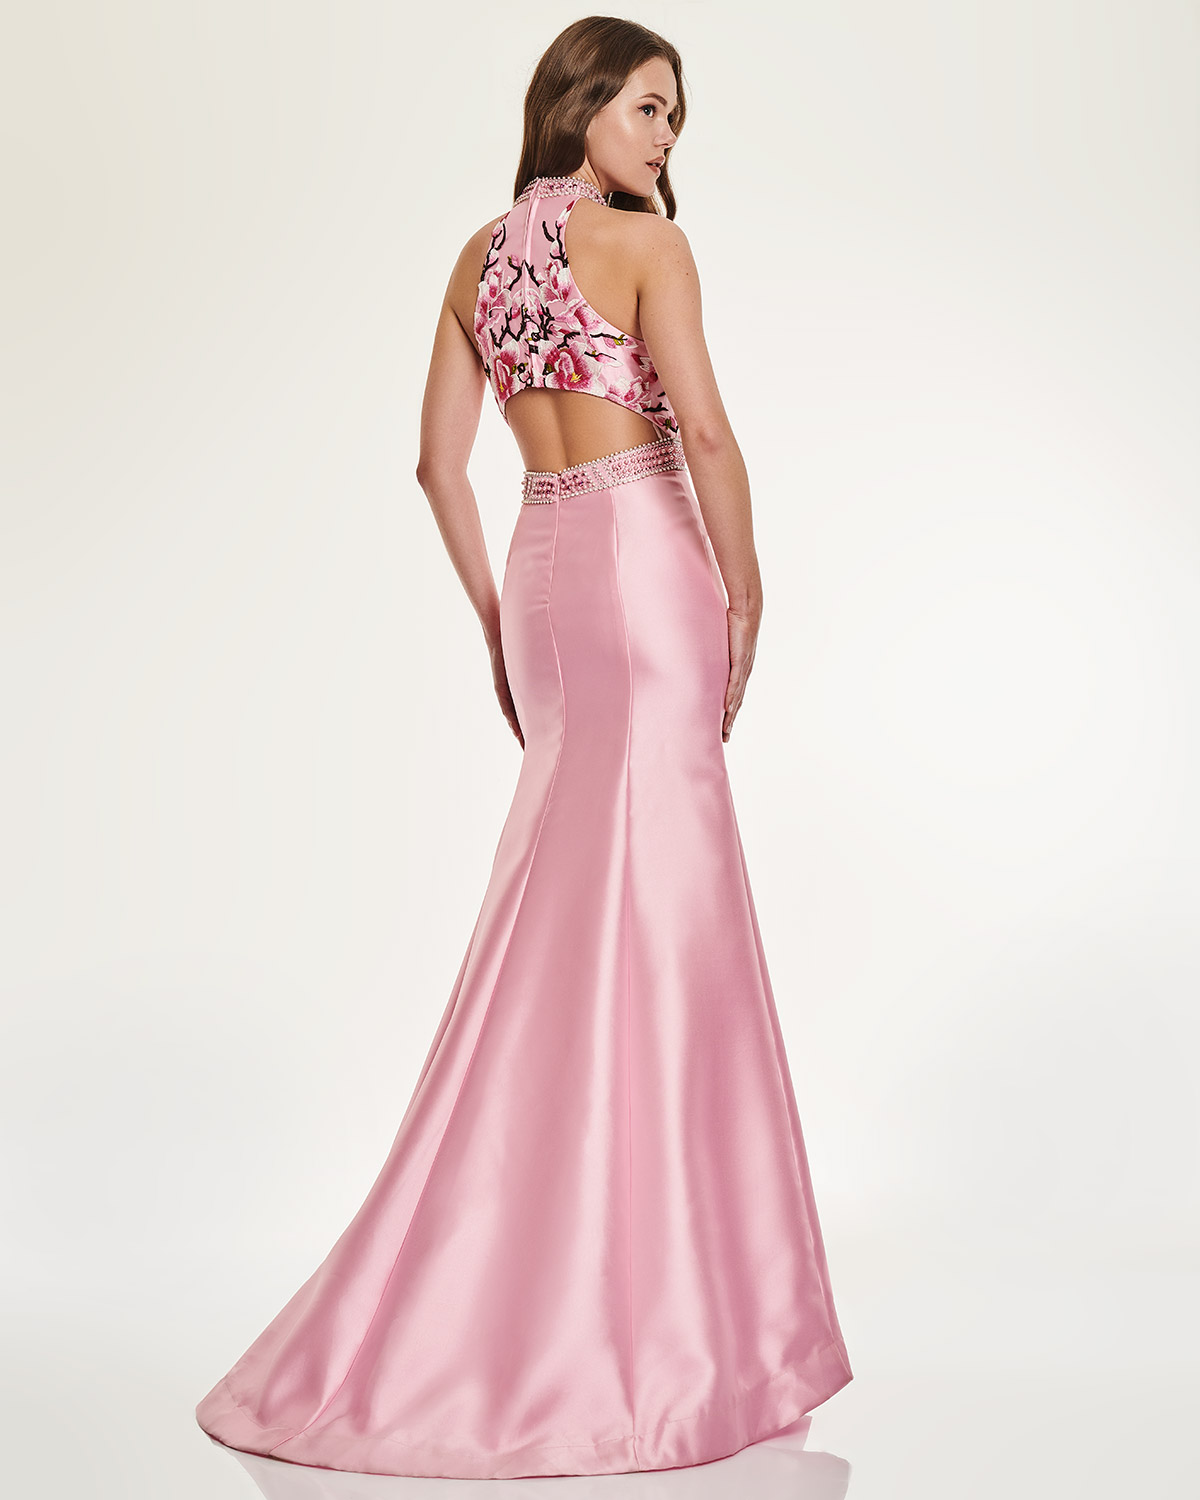 Cocktail Dresses / Long Evening Dress with floral bust and beading